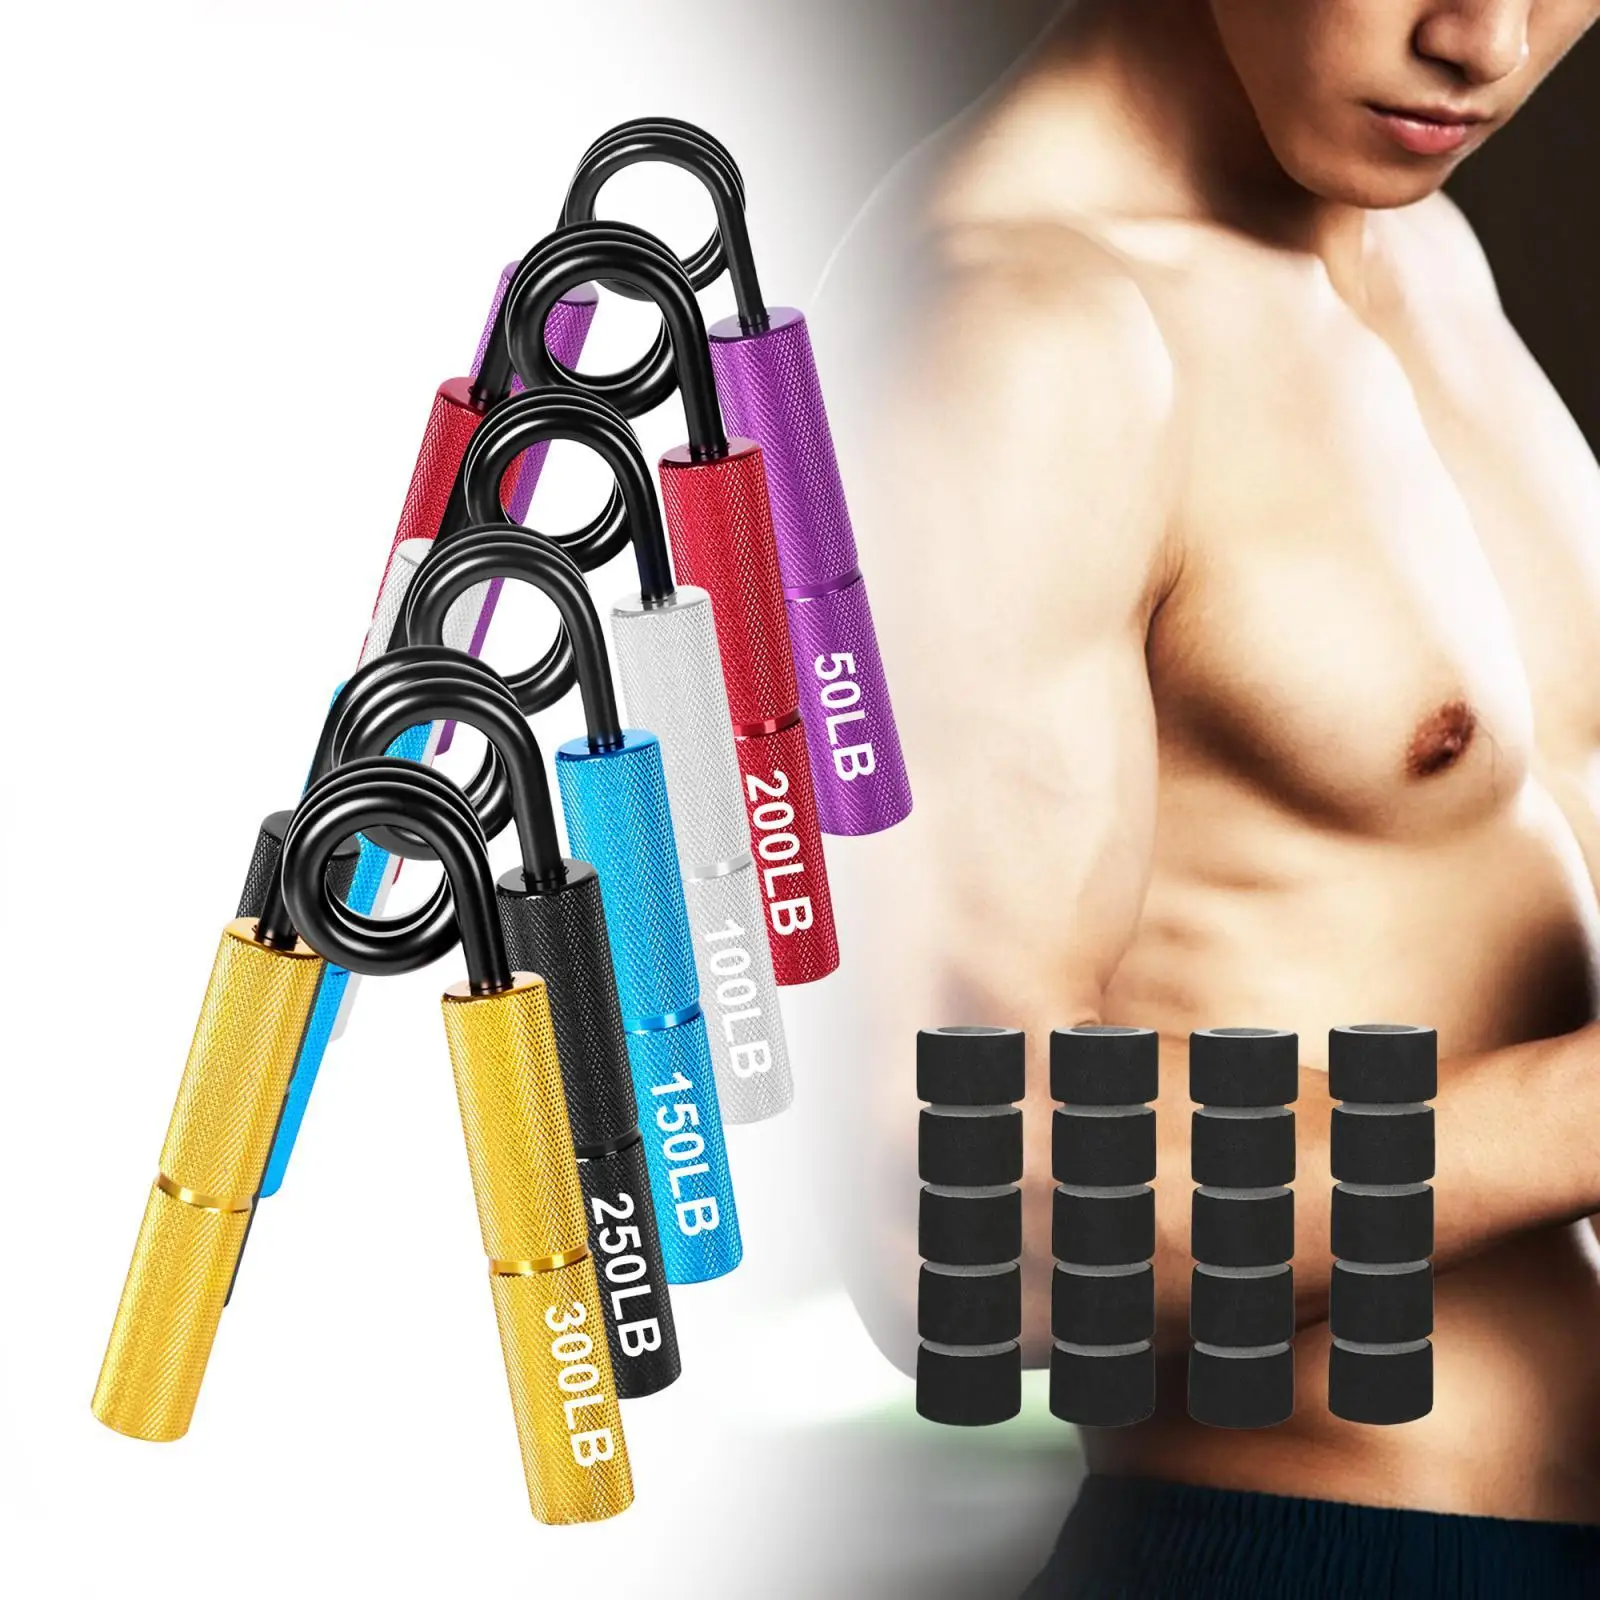 6Pcs Grip Strength Trainer Training Hand Exerciser Manual Forearm Exerciser Hand Grip Strengthener Exercise for Player Piano Gym